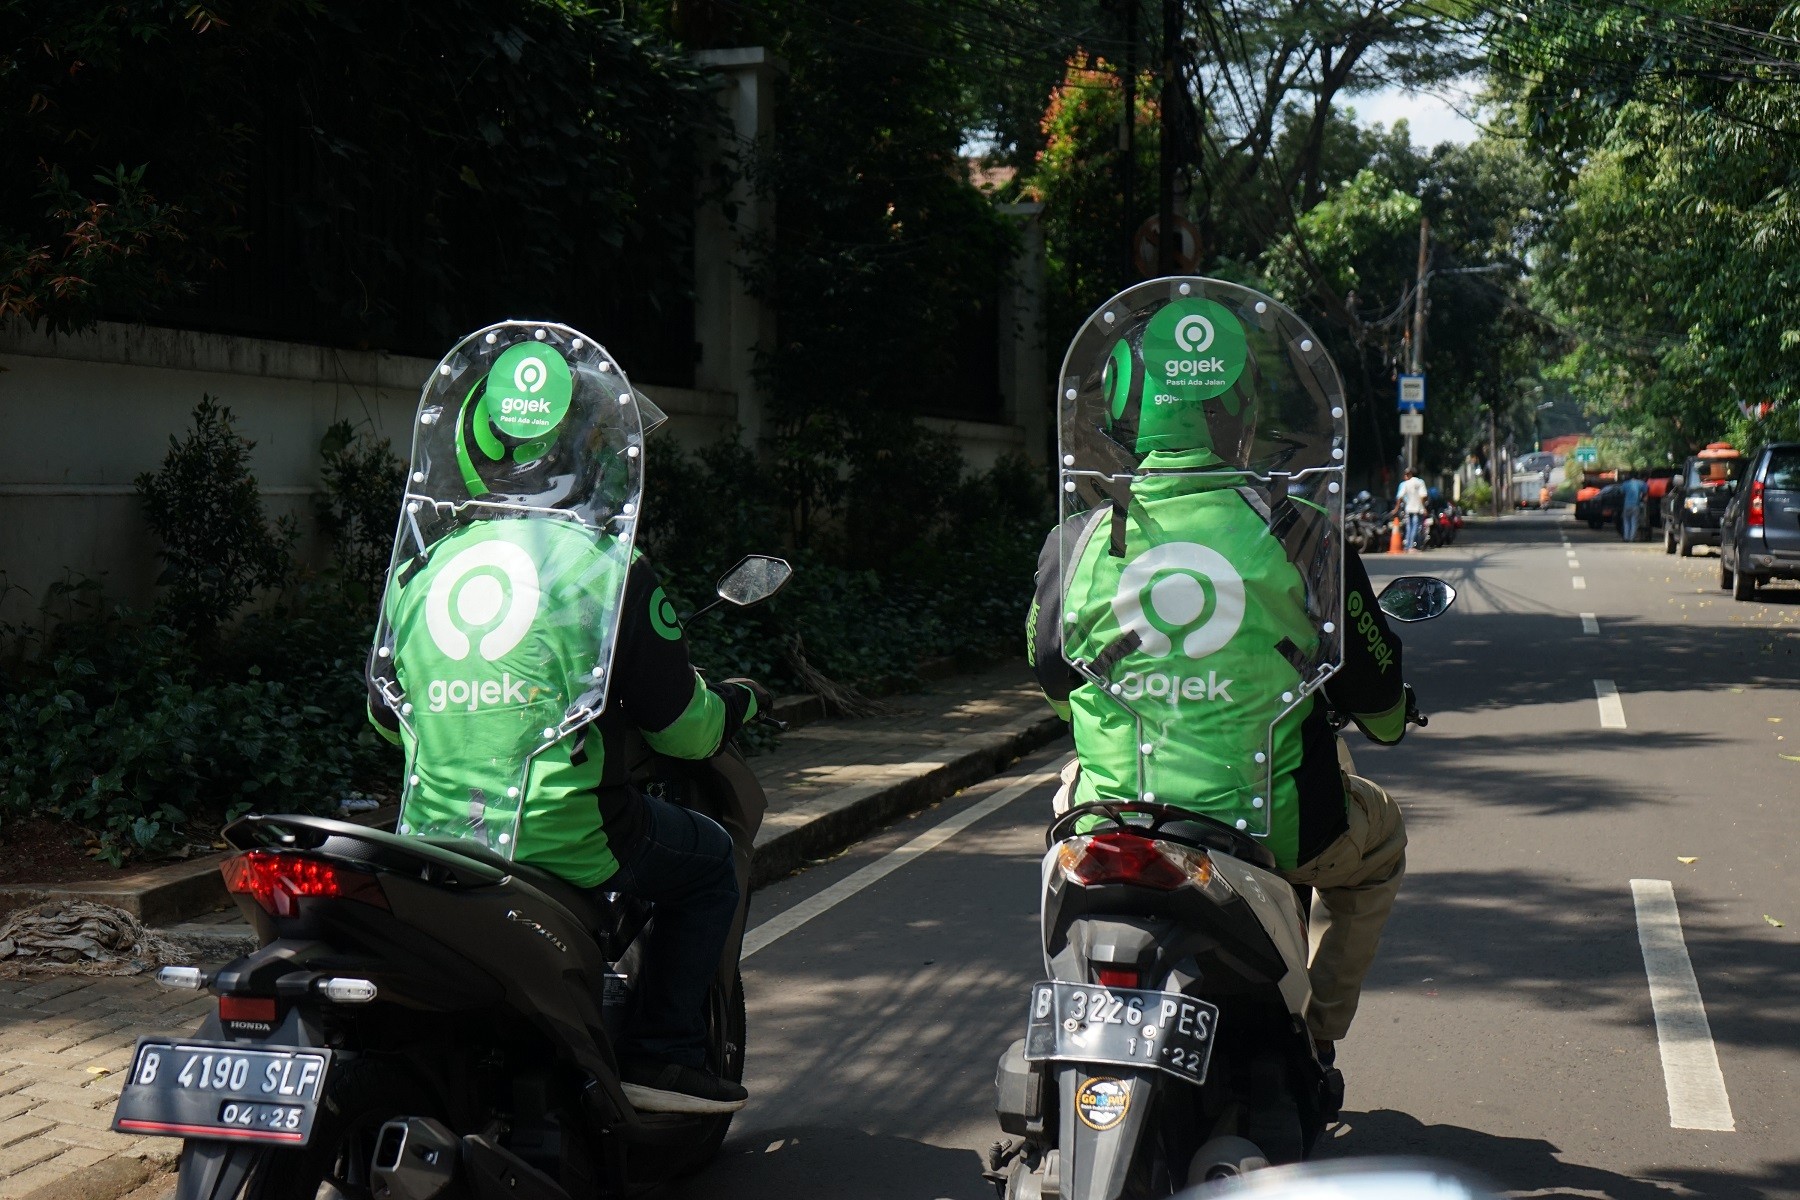 Car with Gojek logo spotted in Malaysia thumbnail